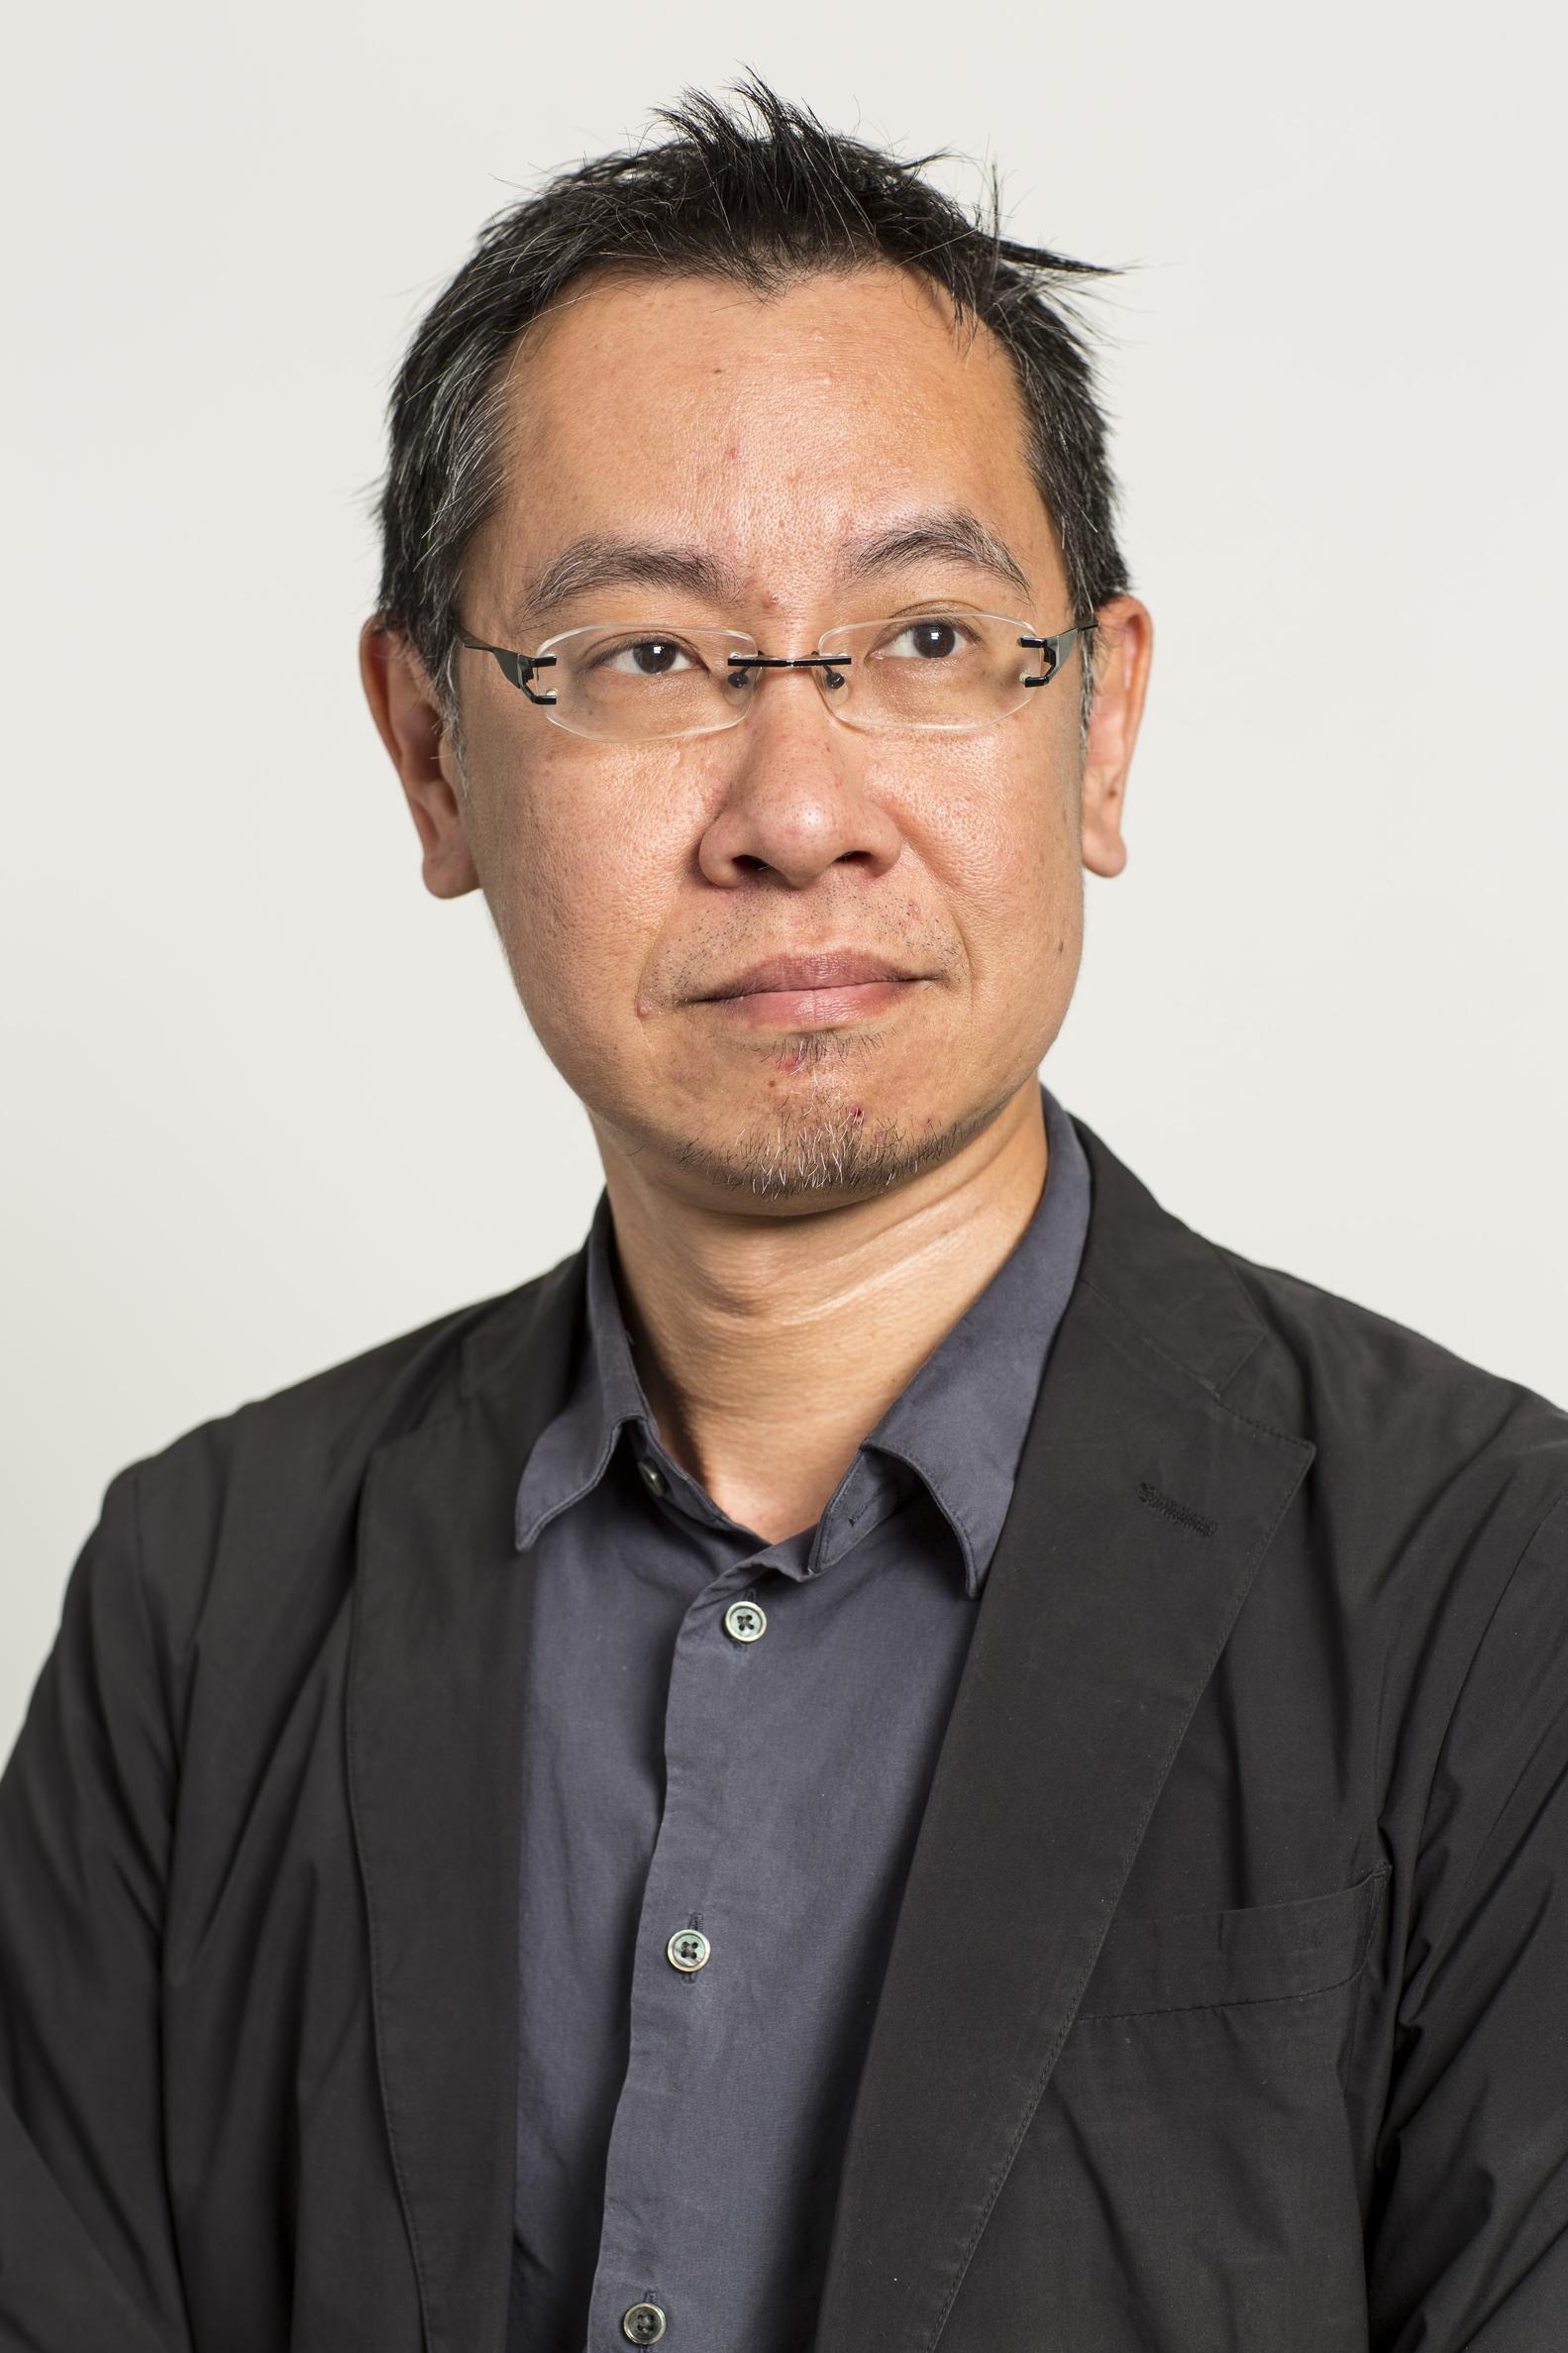 Jeffrey Hou is Professor of Landscape Architecture at the University of Washington where he directs the Urban Commons Lab. He is co-editor, with Sabine Knierbein, of City Unsilenced: Urban Resistance and Public Space in the Age of Shrinking Democracy.